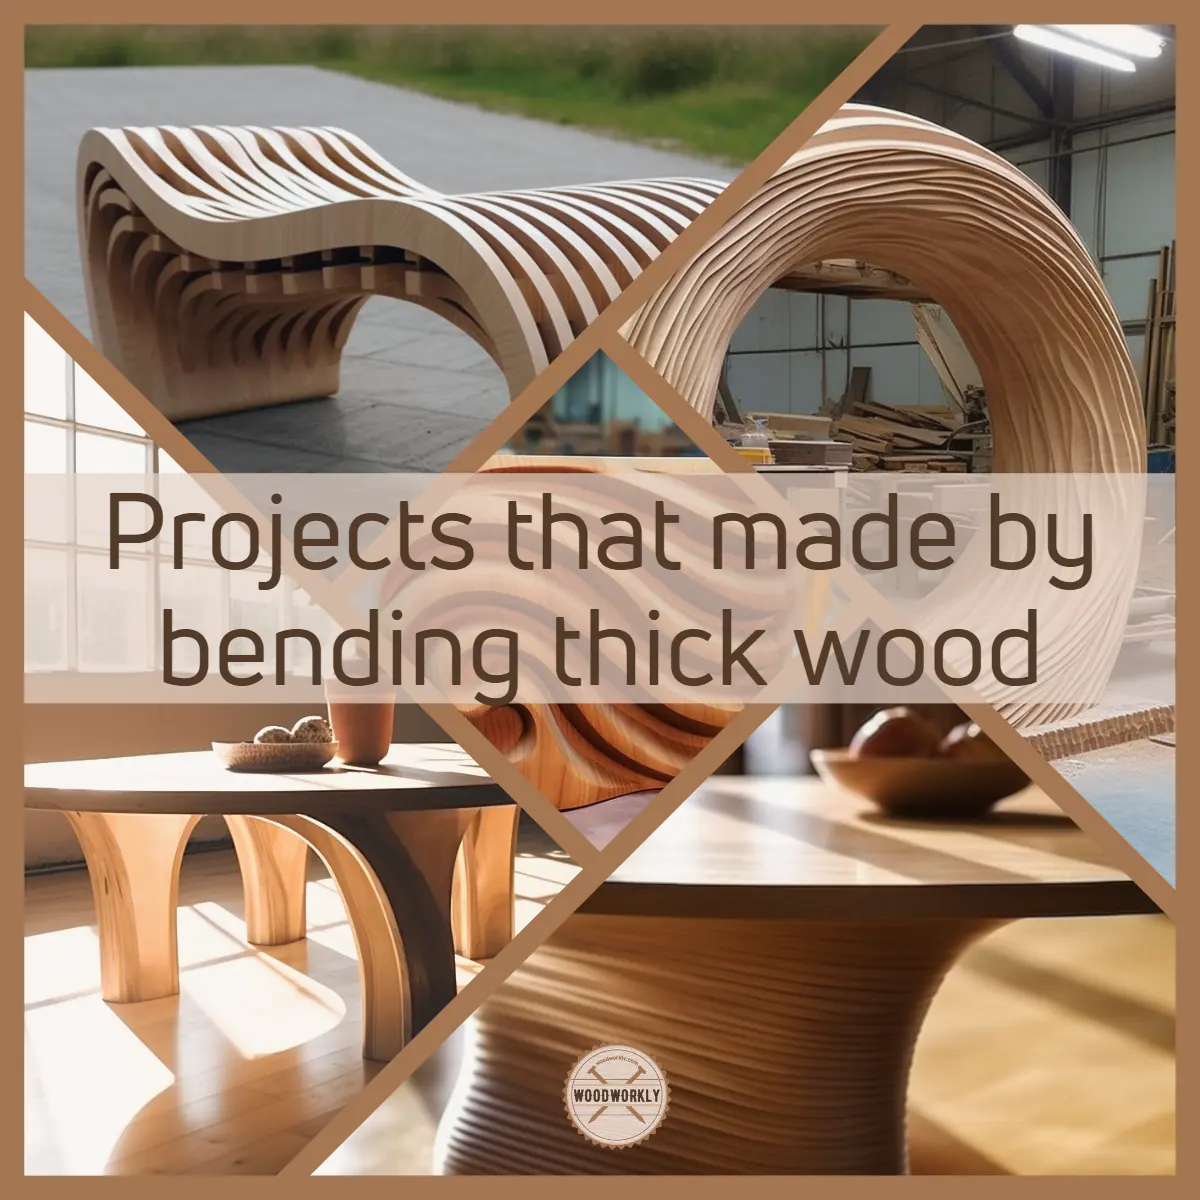 Projects that made by bending thick wood